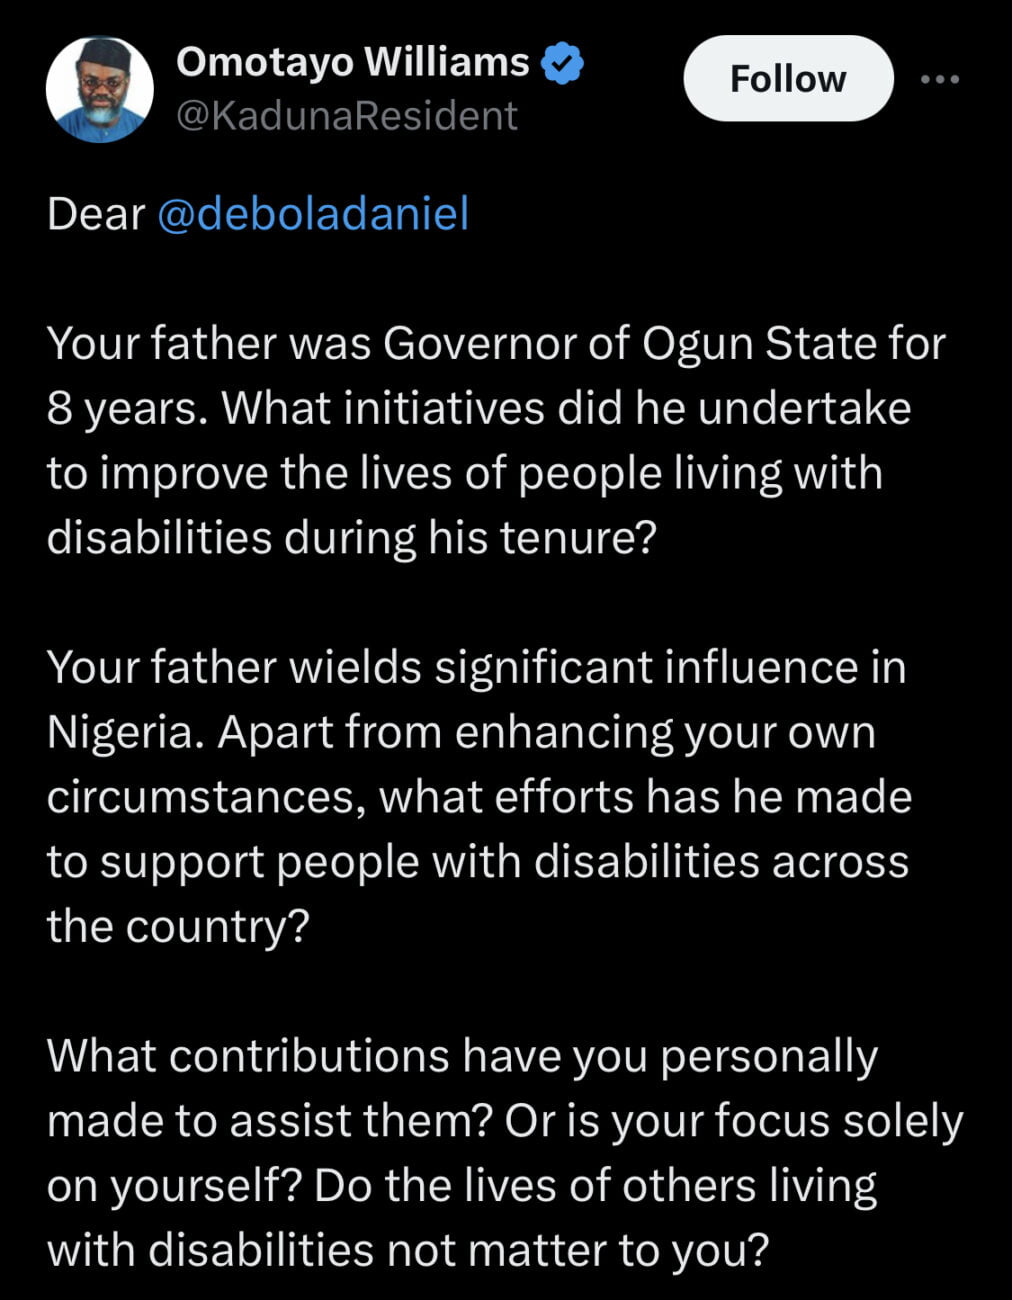 Omotayo Williams questions Adebola Daniel about what his father did for people with disabilities when he was the Governor of Ogun State.